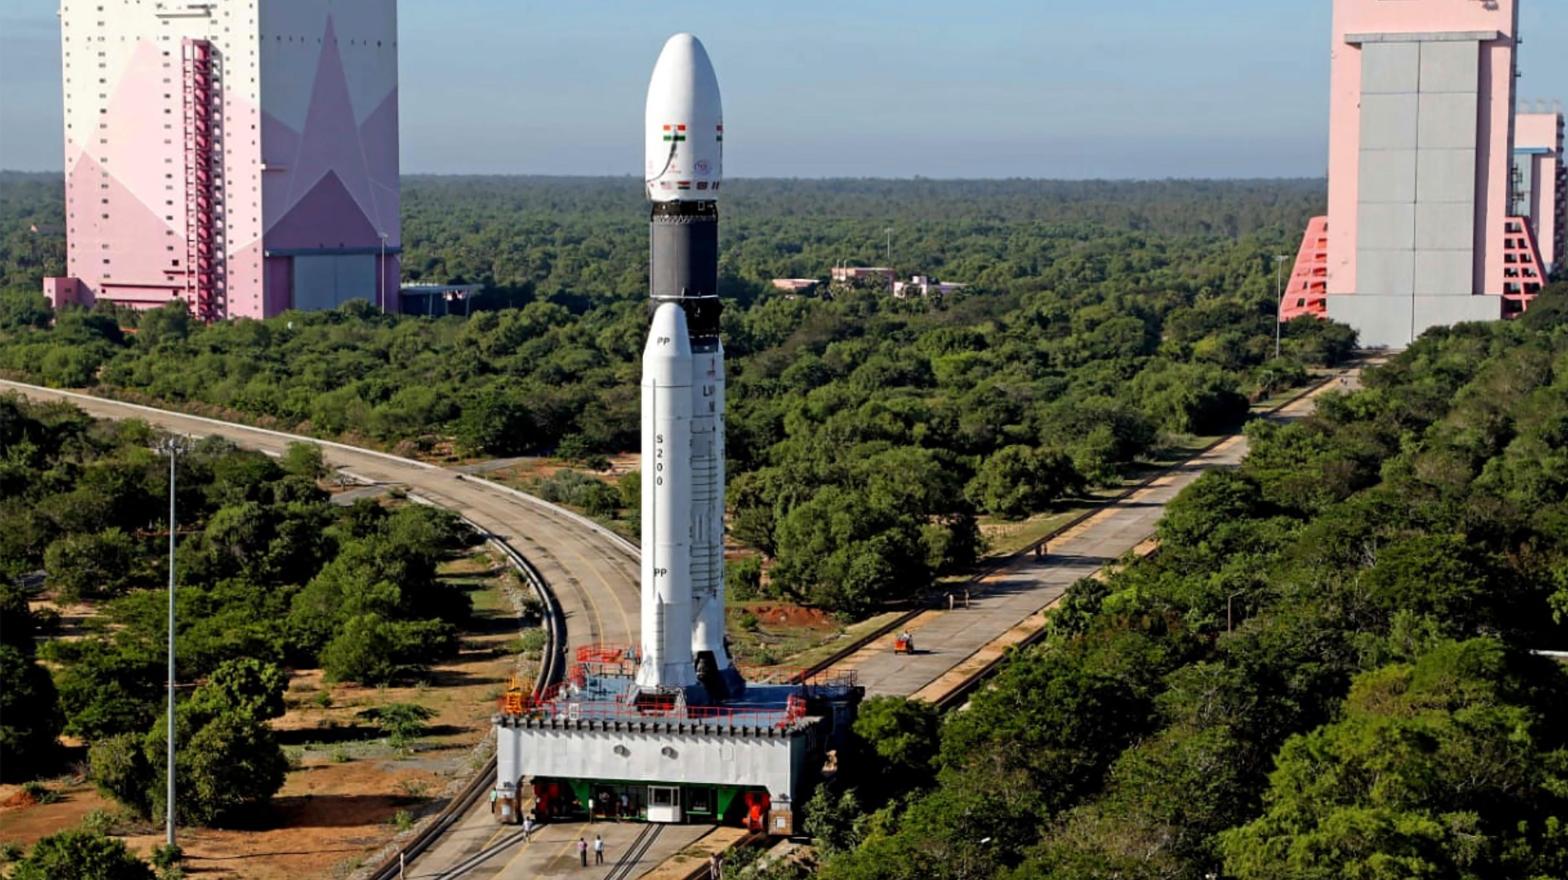 India's heaviest rocket is prepared for launch at the Satish Dhawan Space Centre in Sriharikota, India. (Photo: Indian Space Research Organisation, AP)